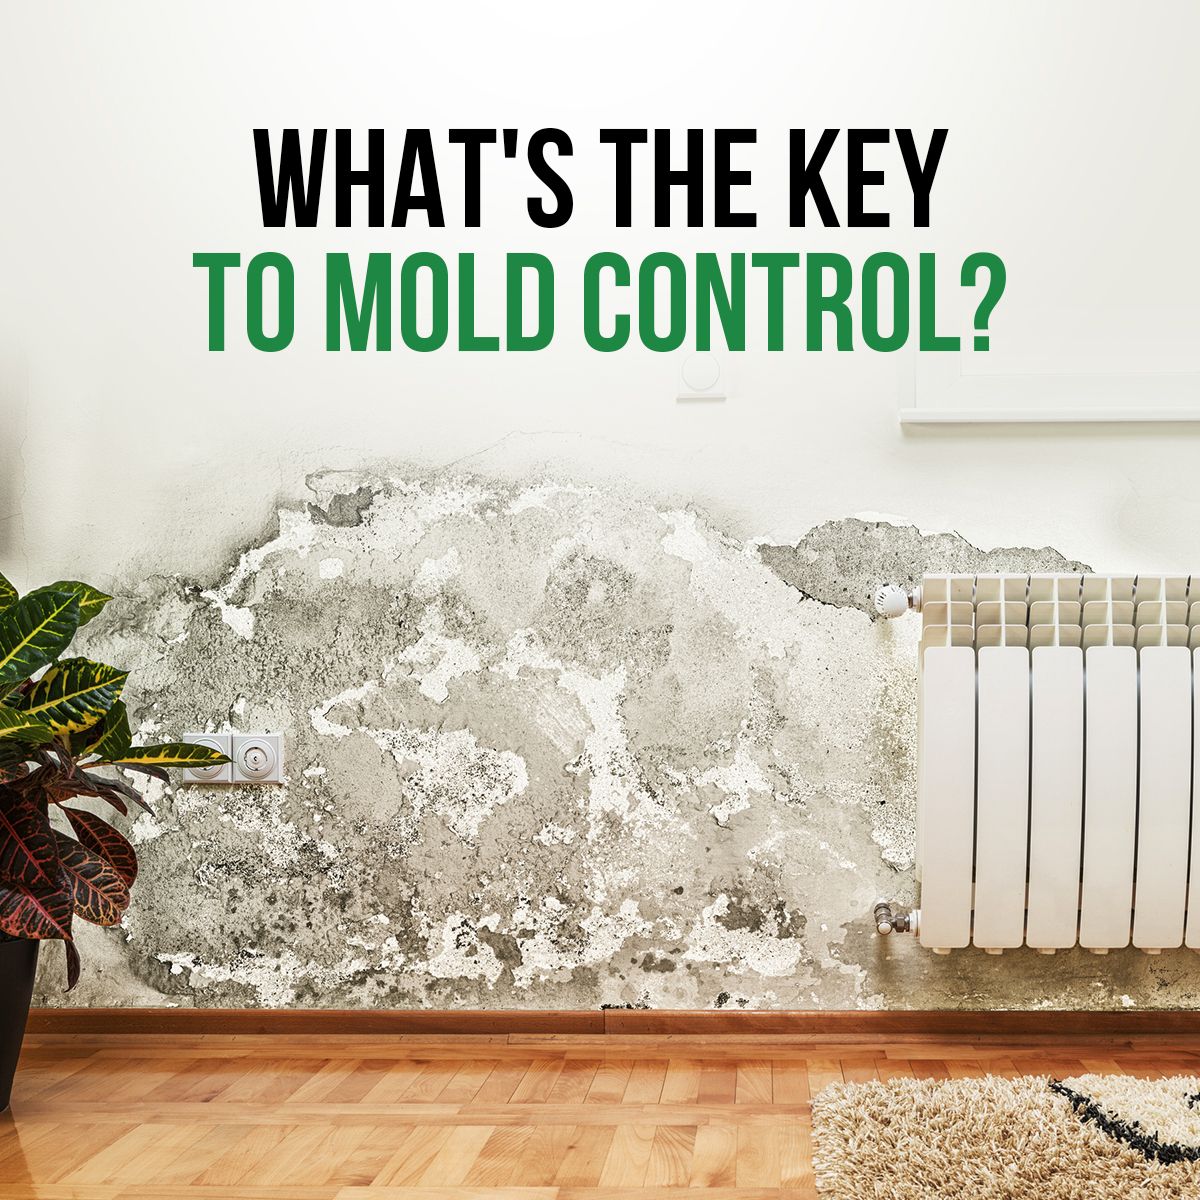 What's the Key To Mold Control?